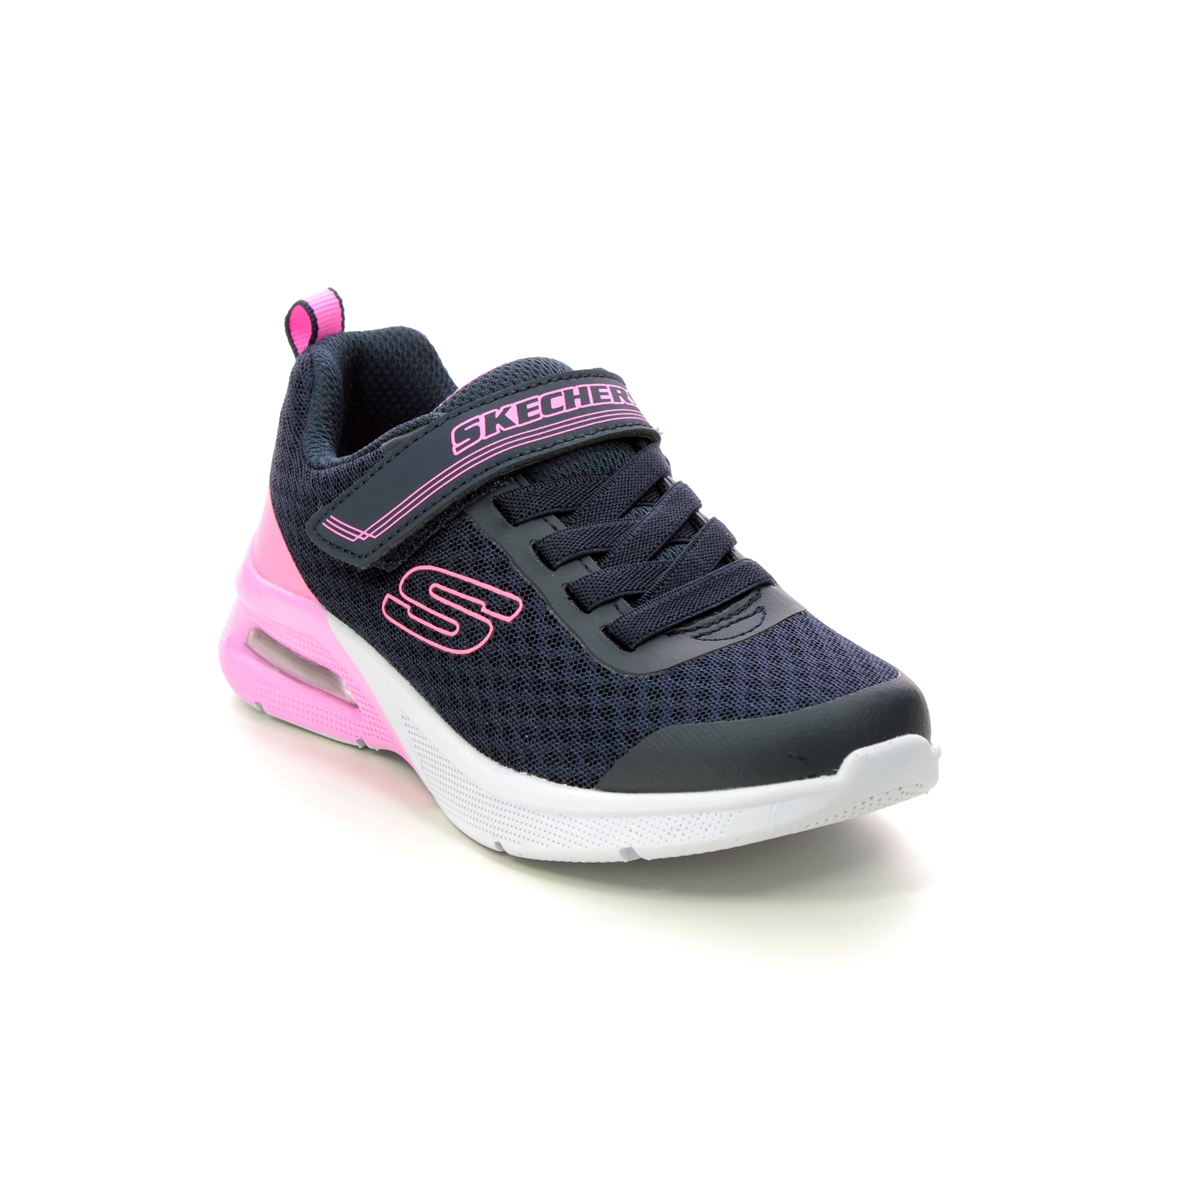 Skechers Microspec Max Bungee Navy Kids Girls Trainers 302343L In Size 36 In Plain Navy For kids